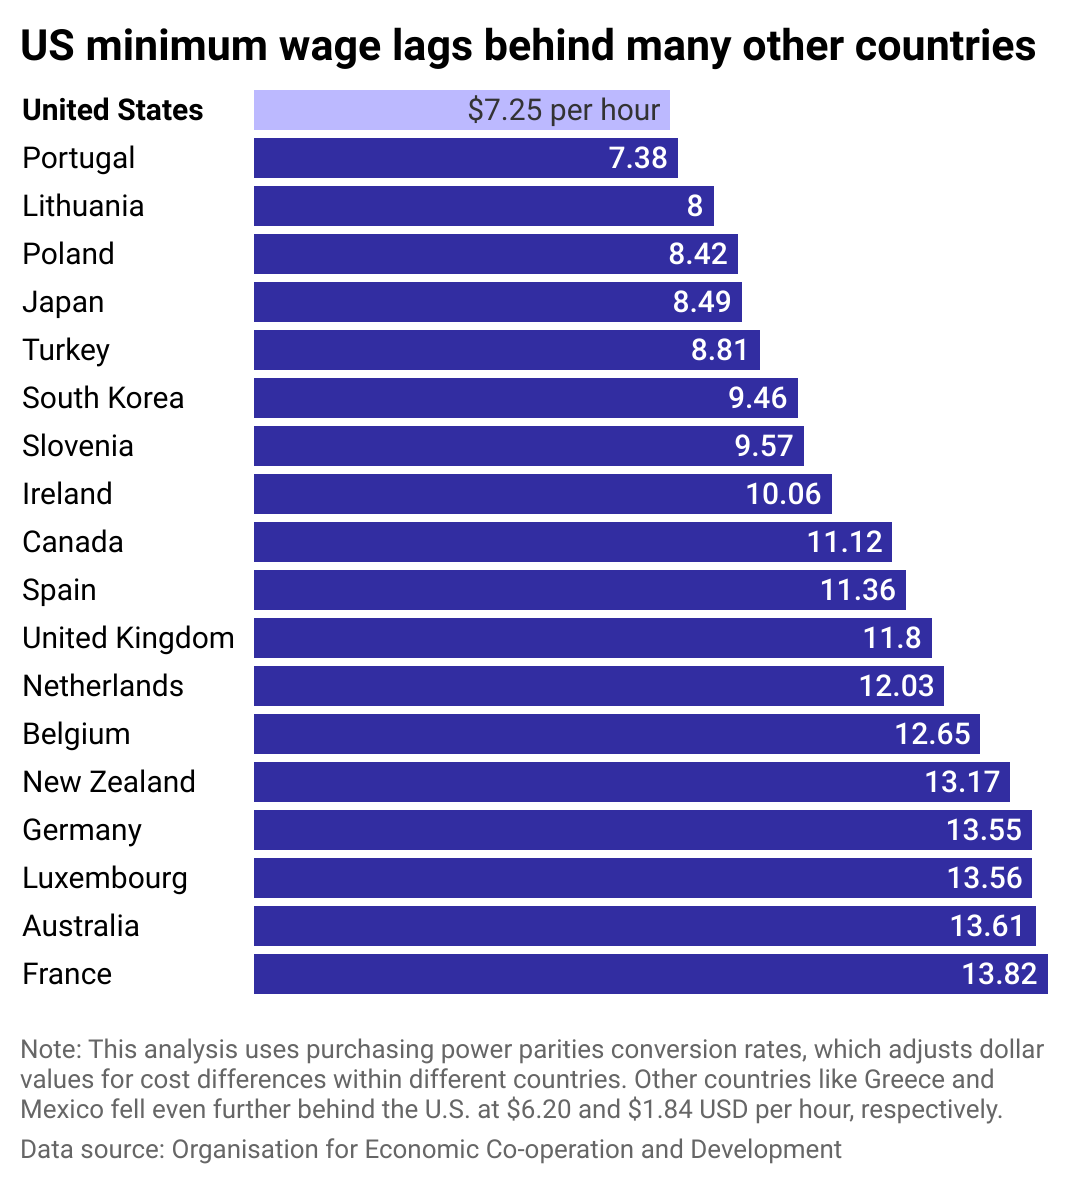 A column chart showing the minimum wage across 19 countries.